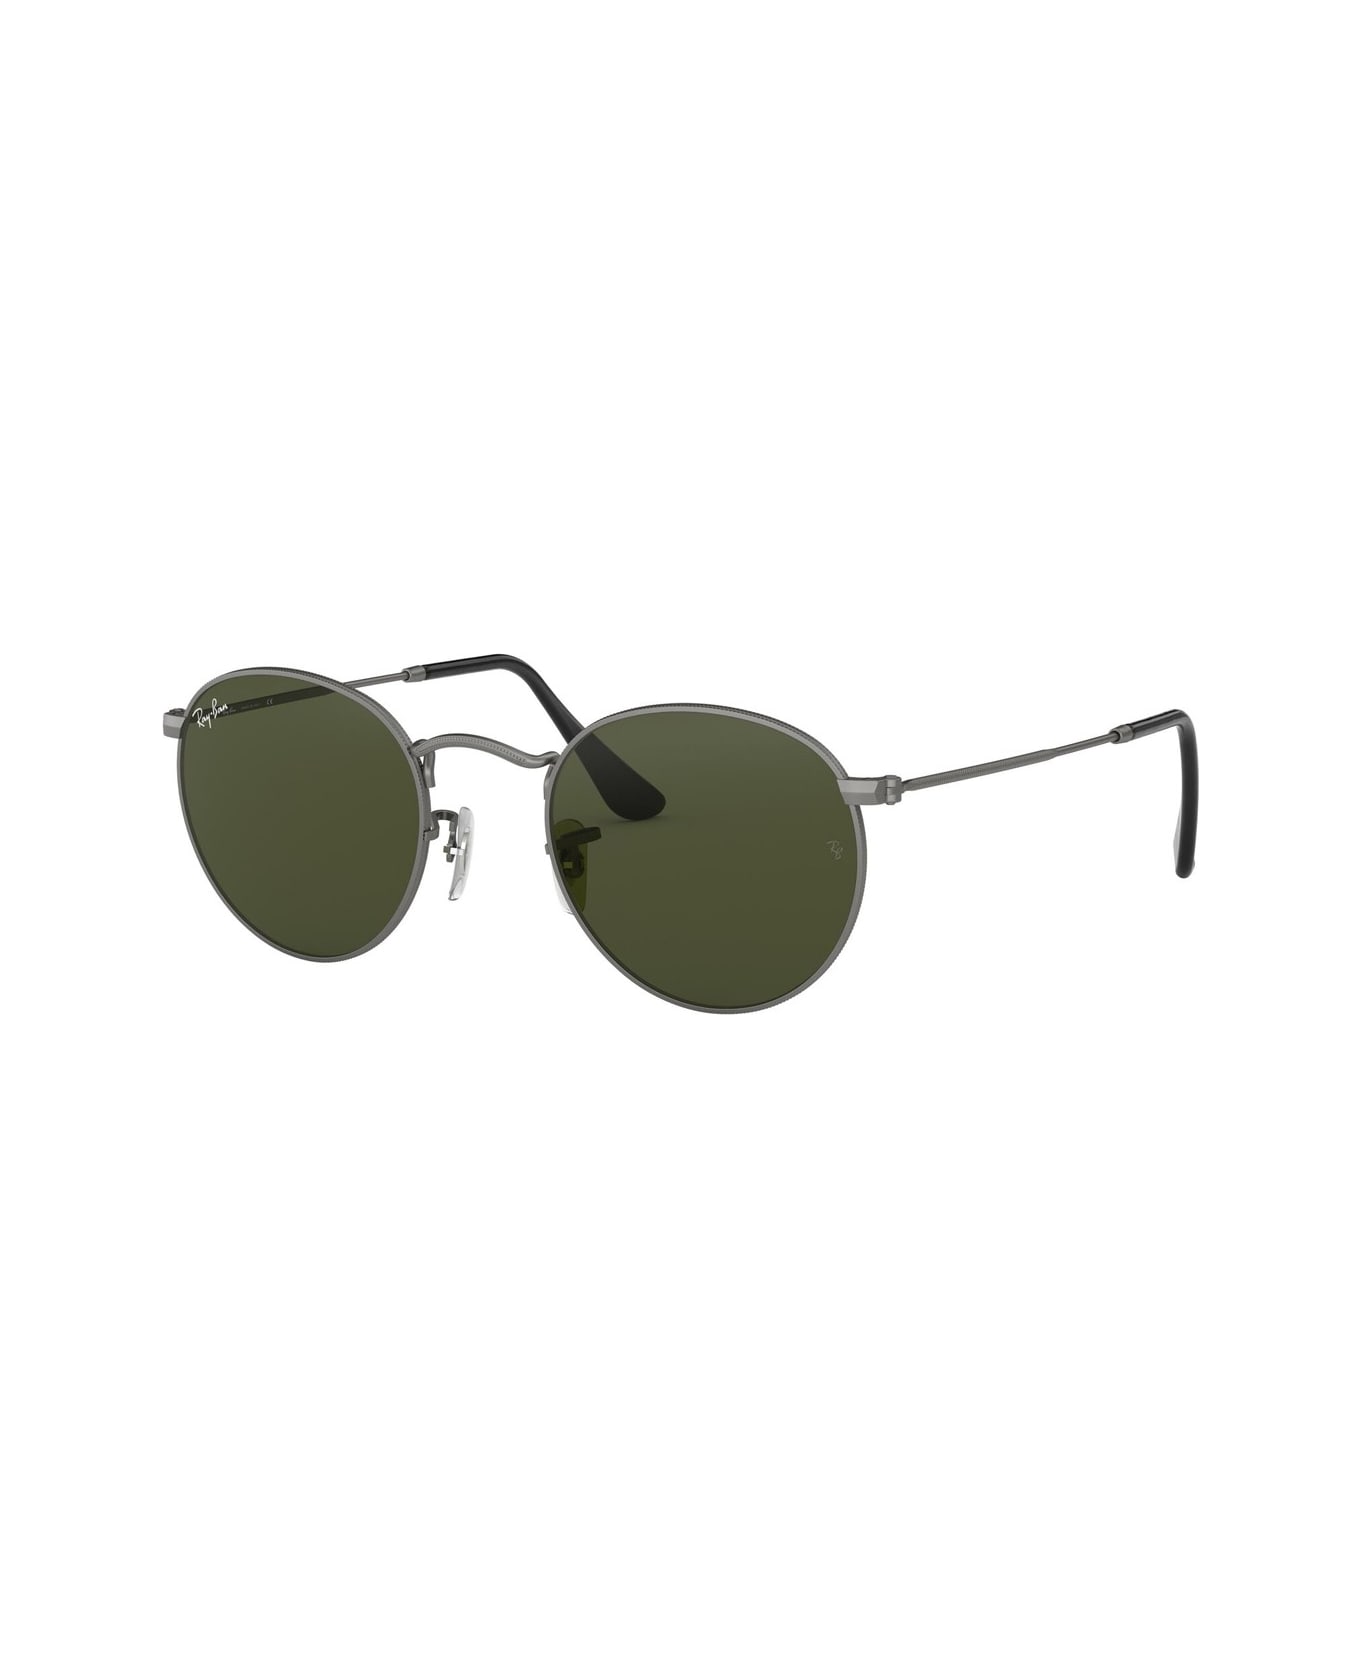 Ray-Ban Round Metal Rb 3447 Sunglasses - Argento